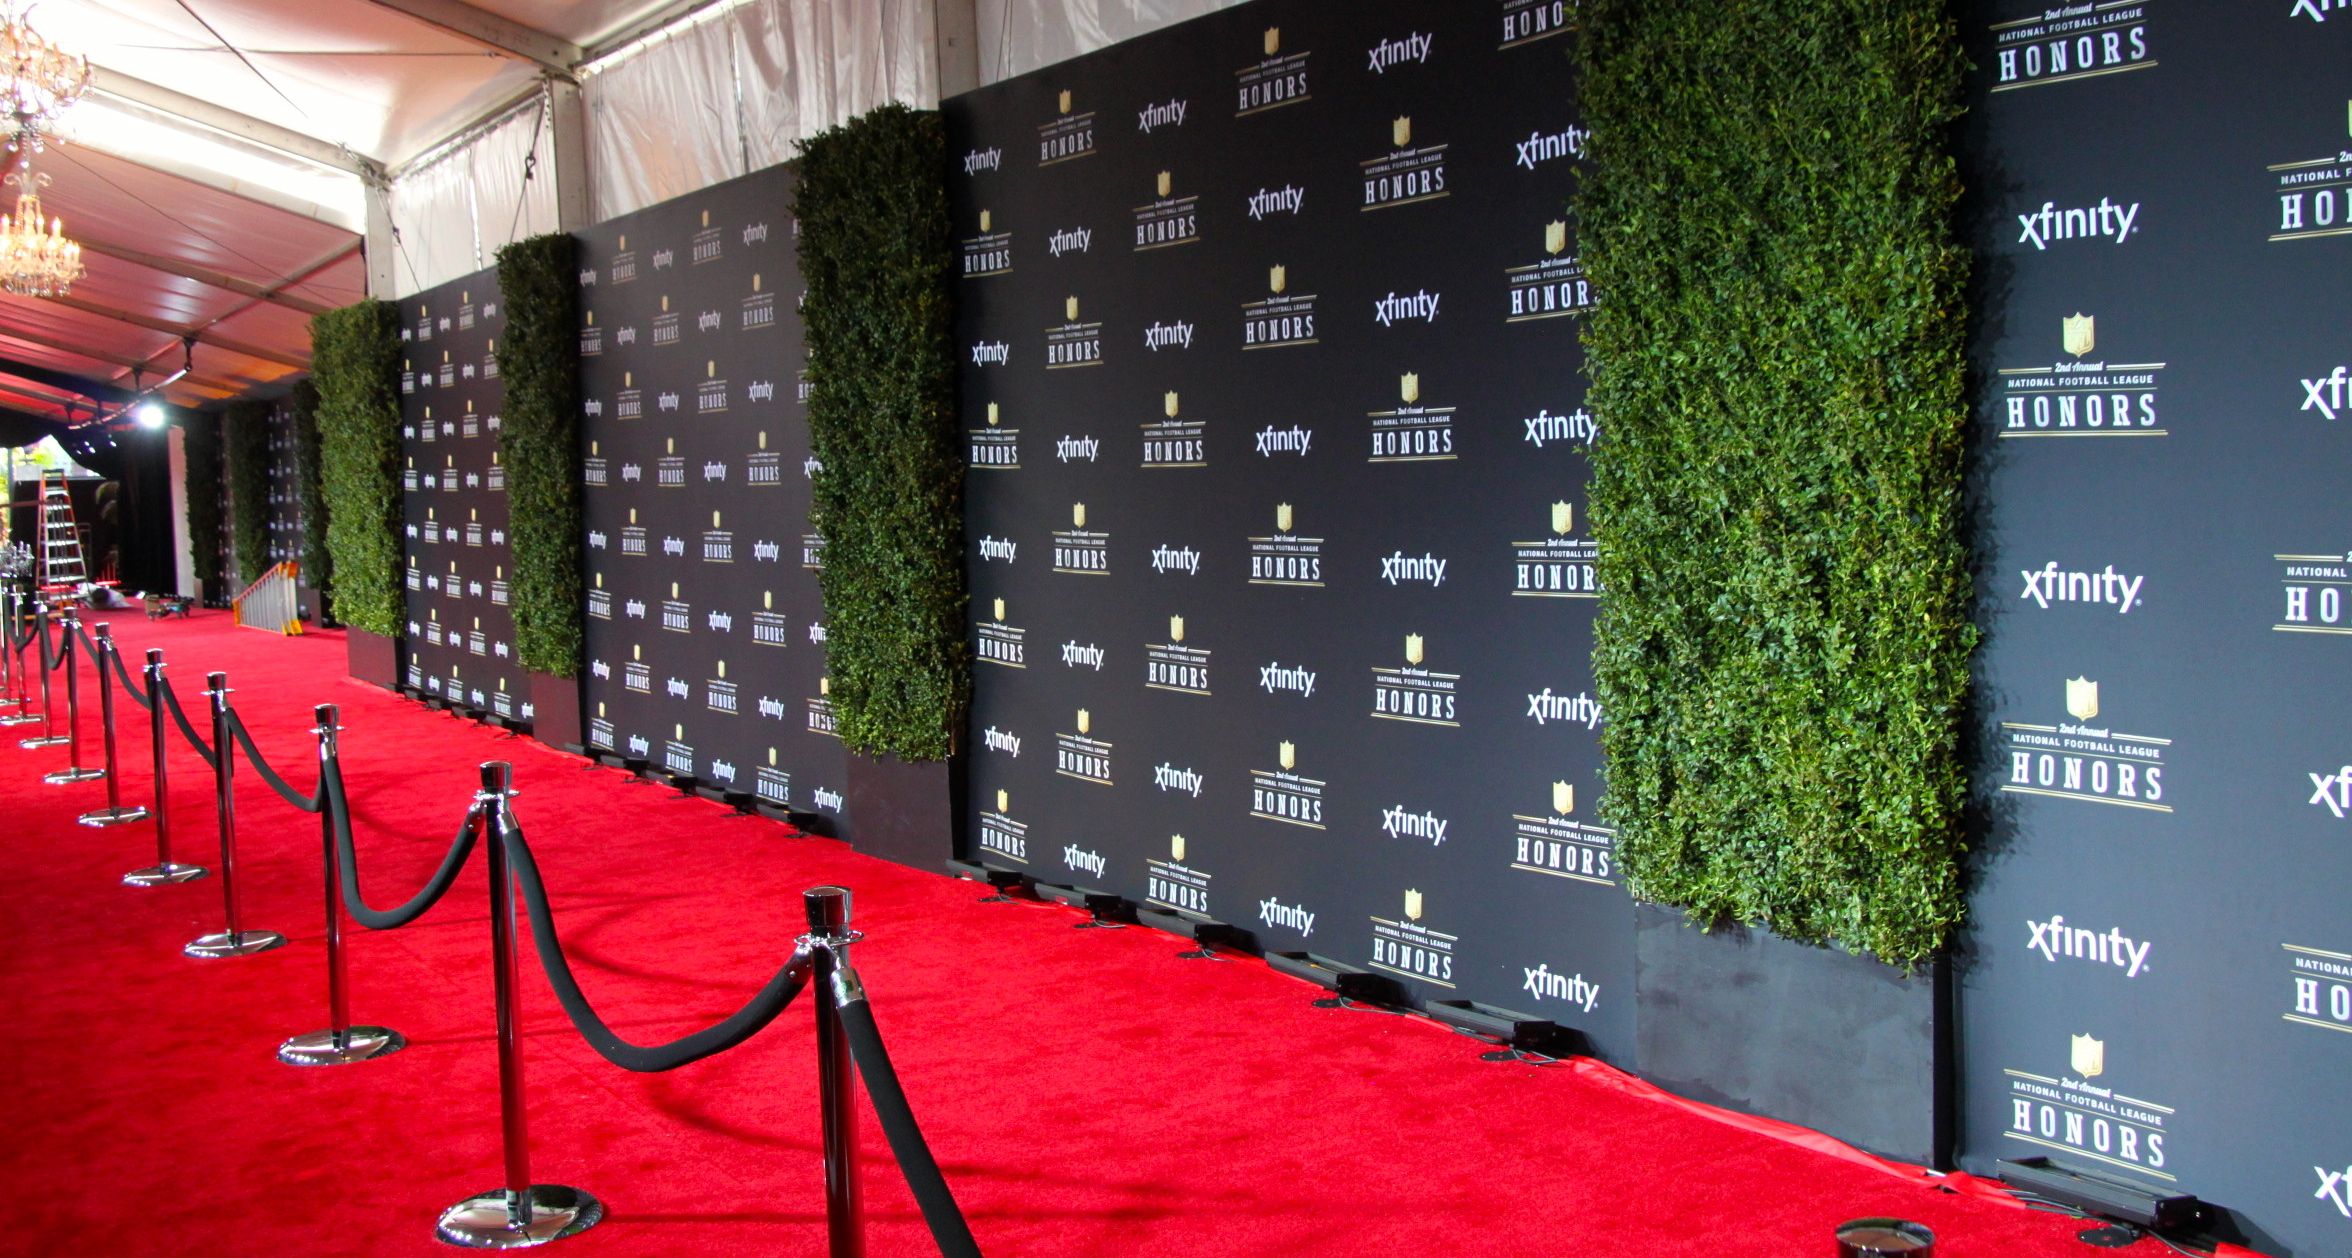 For Red Carpet Background Boards Displaying Image